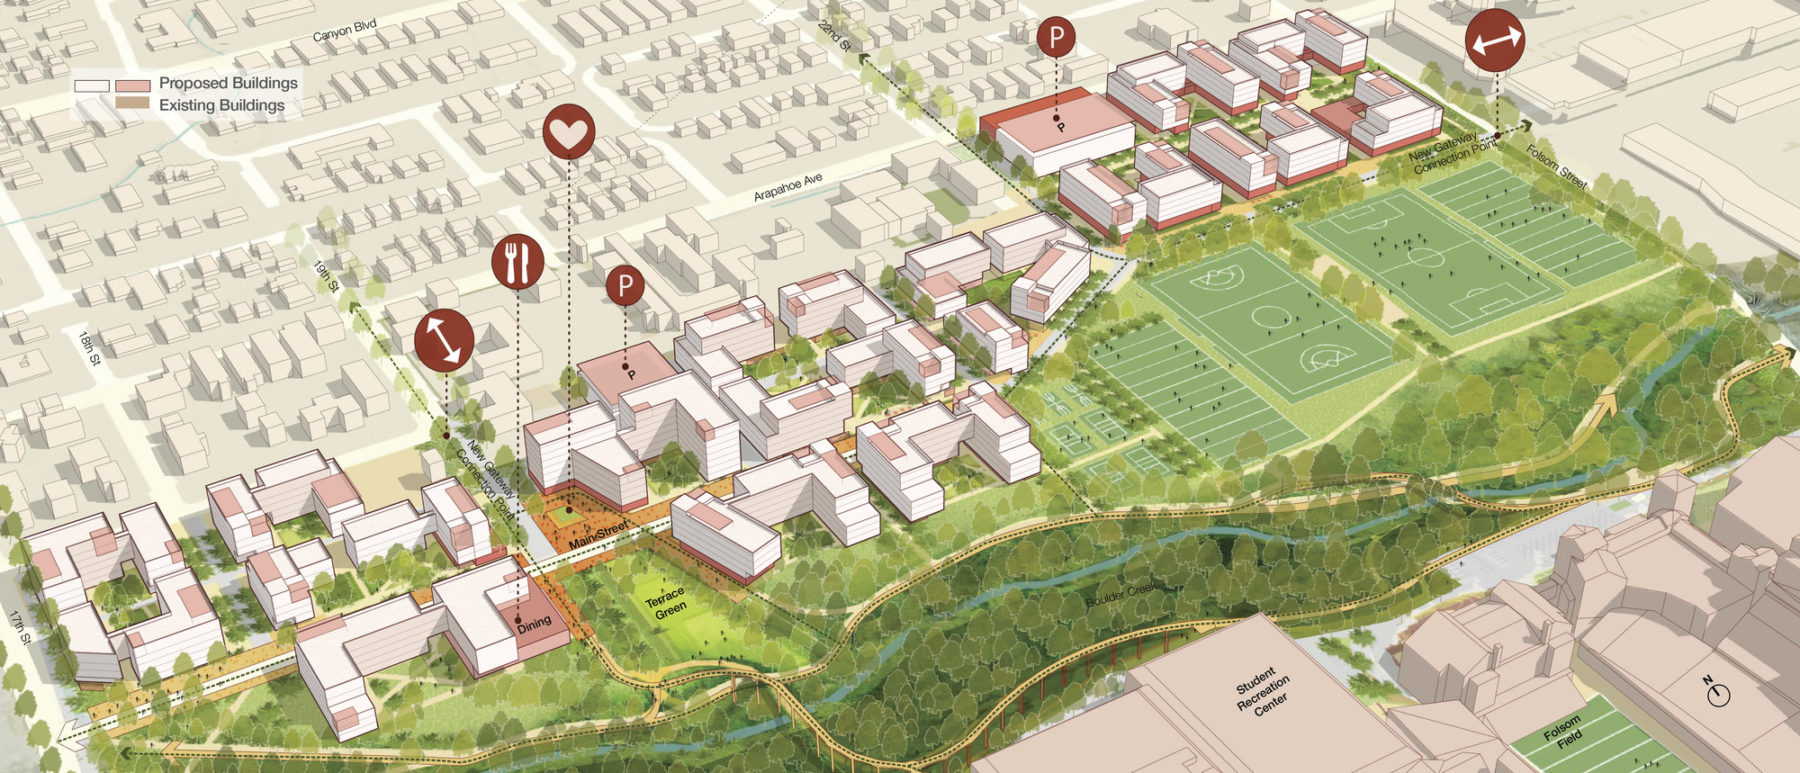 aerial axon drawing highlighting program elements in campus district